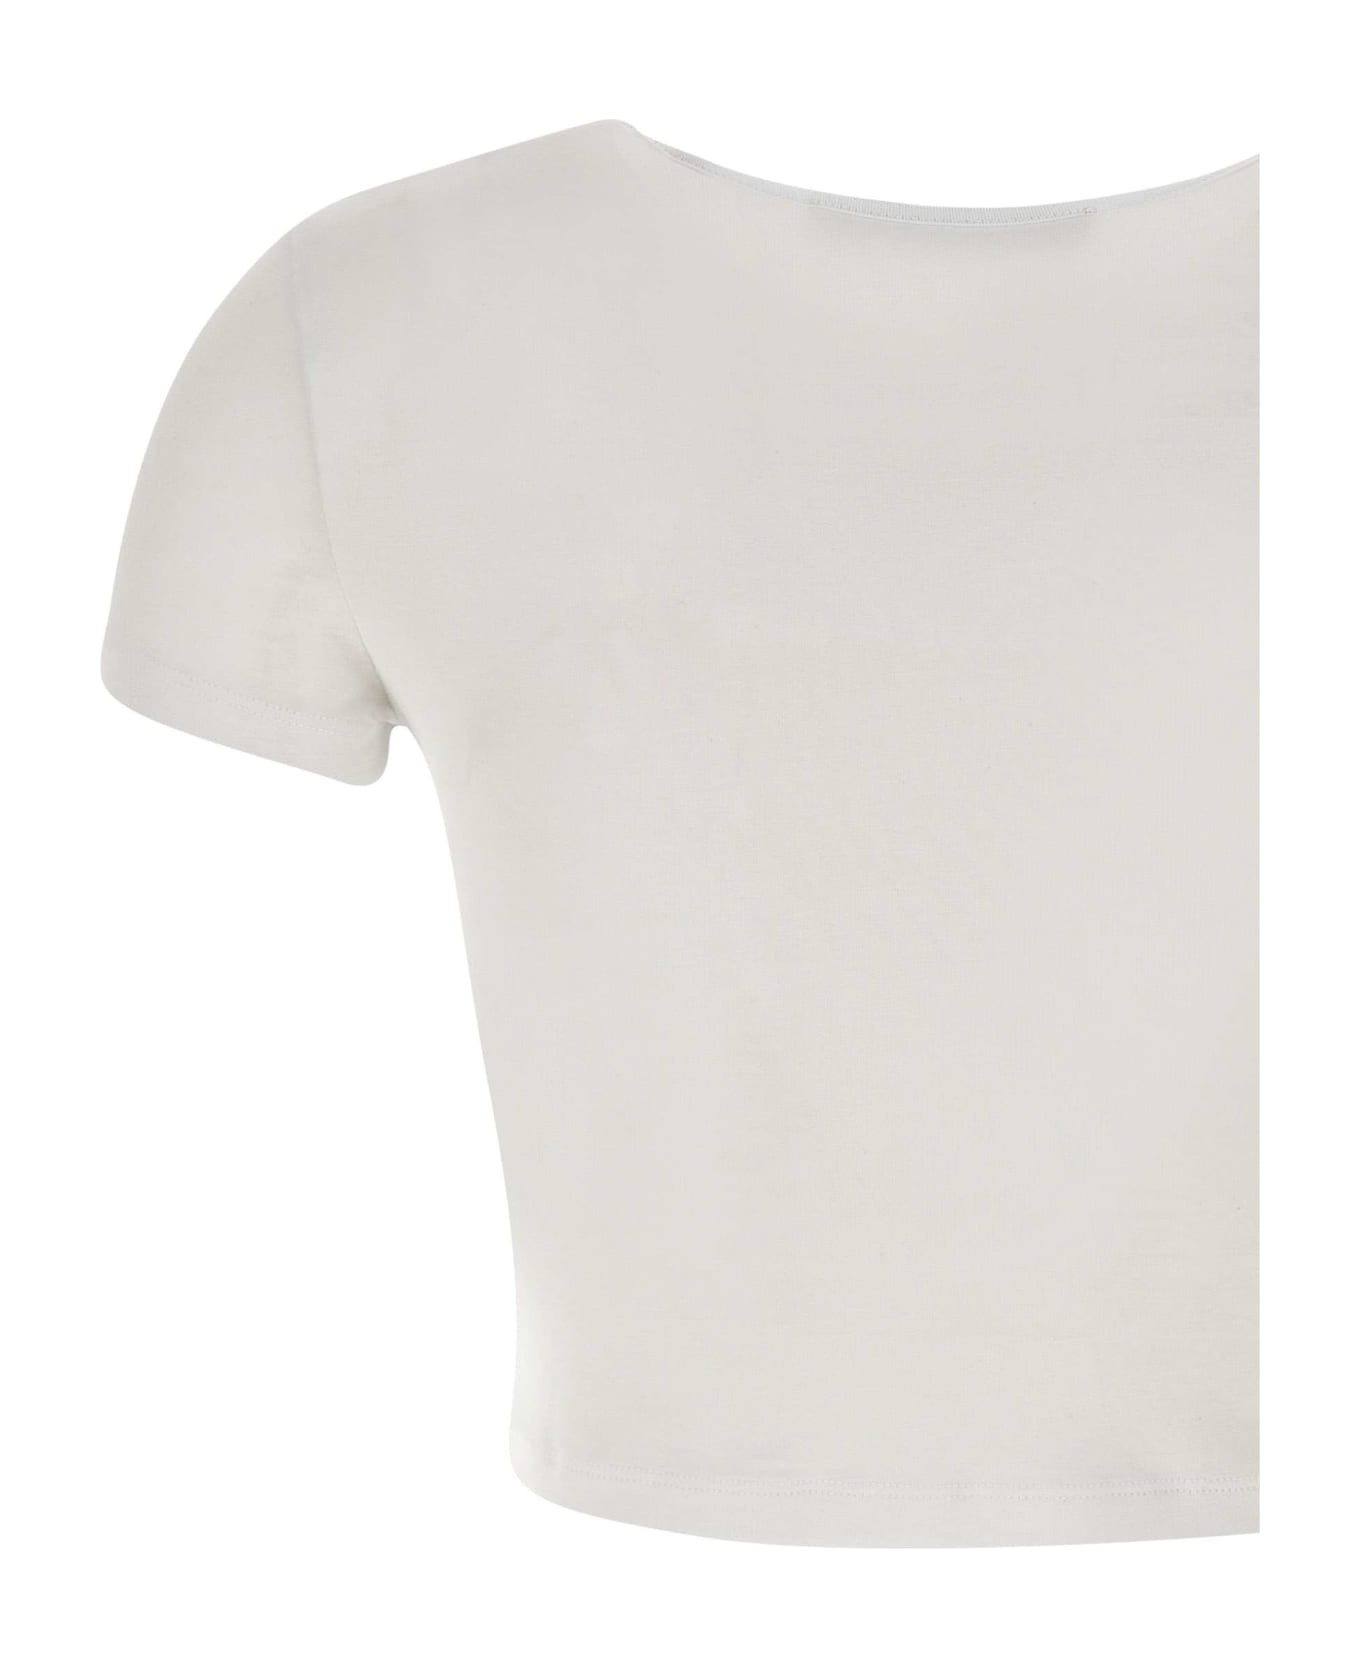 Rotate by Birger Christensen "may" Top - WHITE Tシャツ